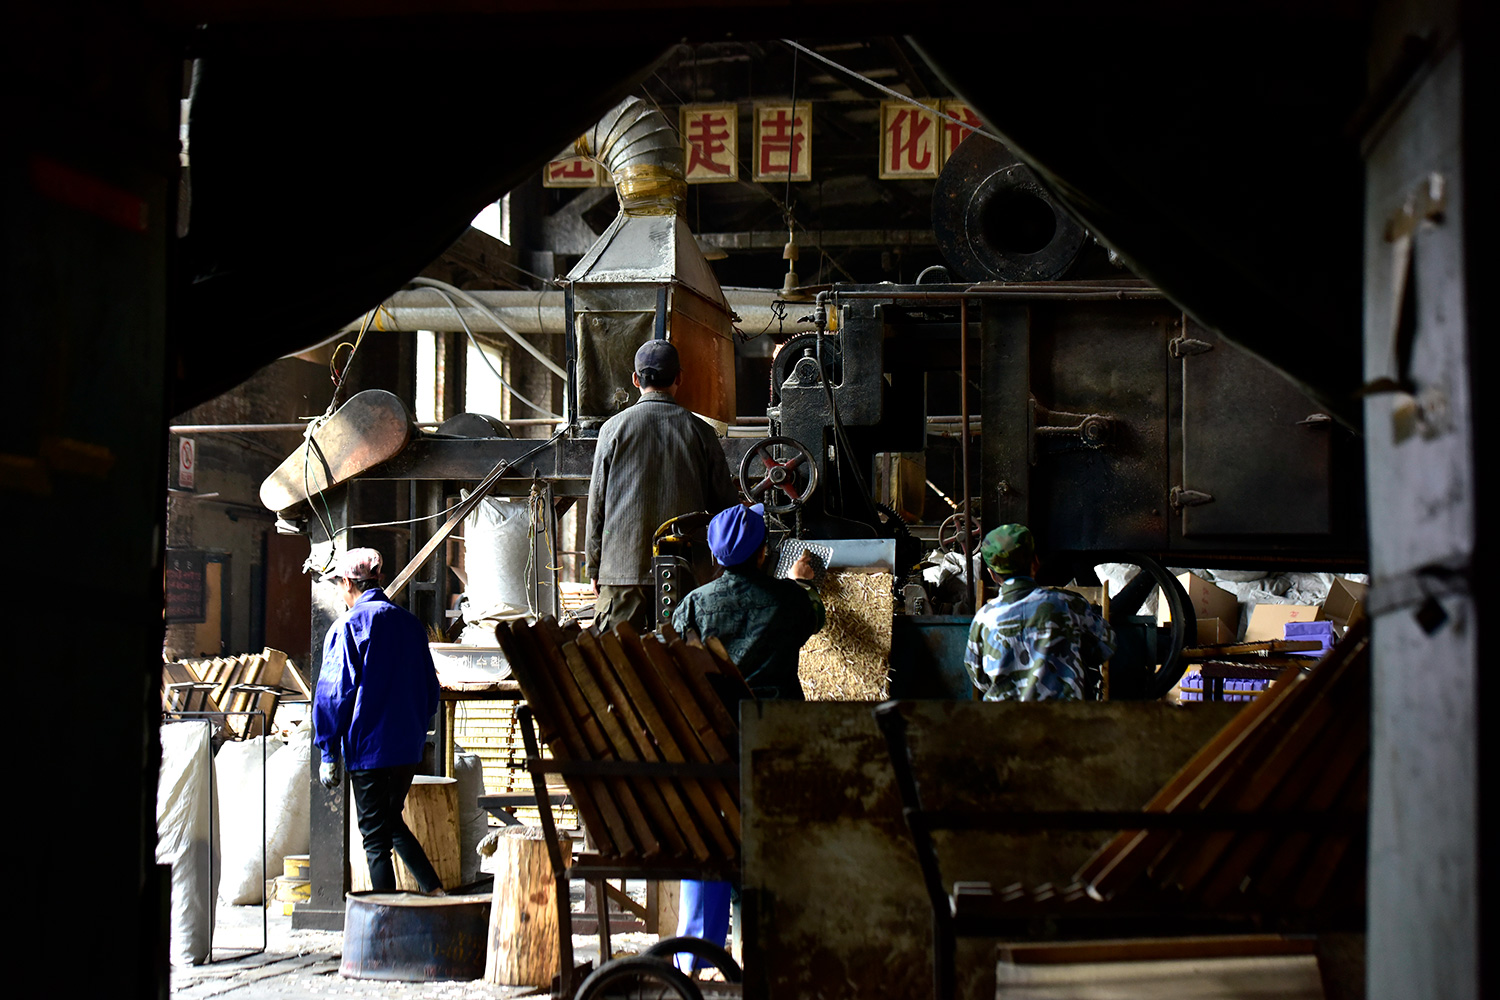 The factory has employed three generations of workers.